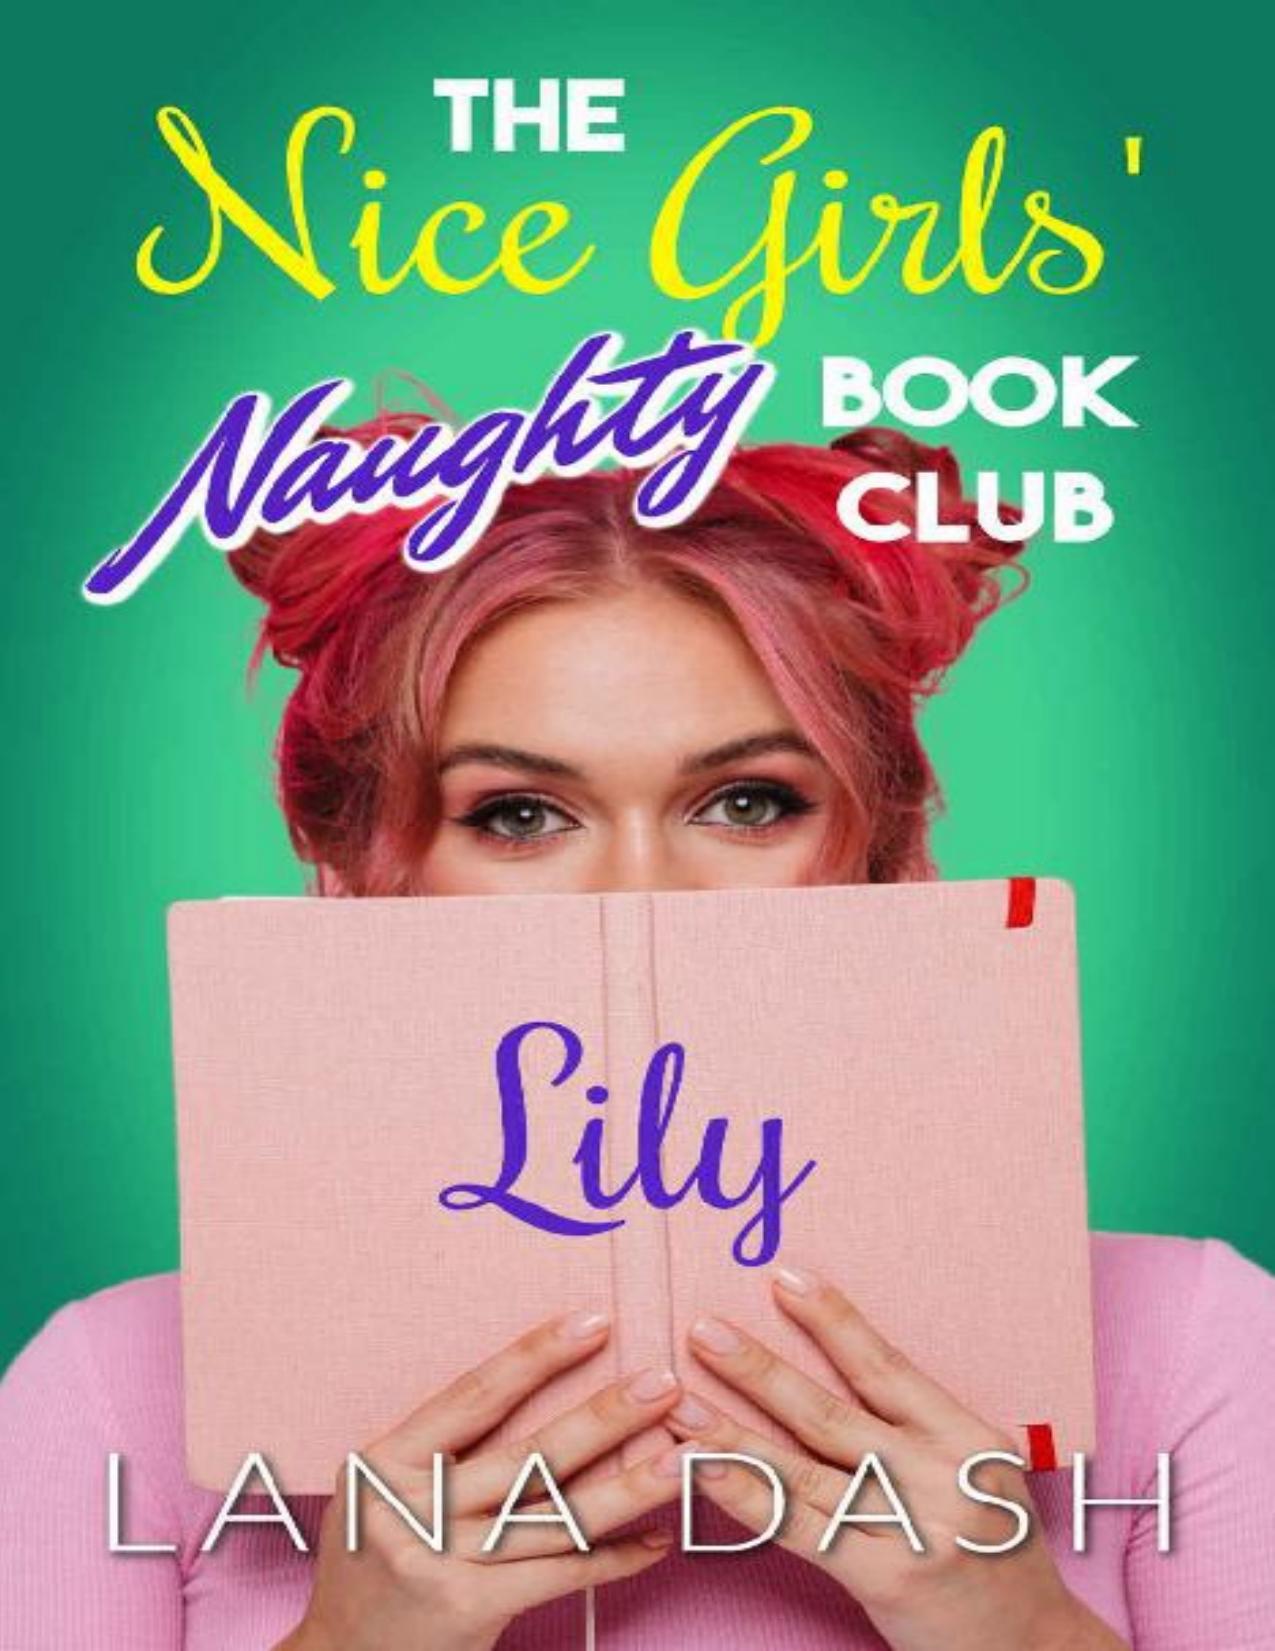 Download Lily A Curvy Girl Romance The Nice Girls Naughty Book Club